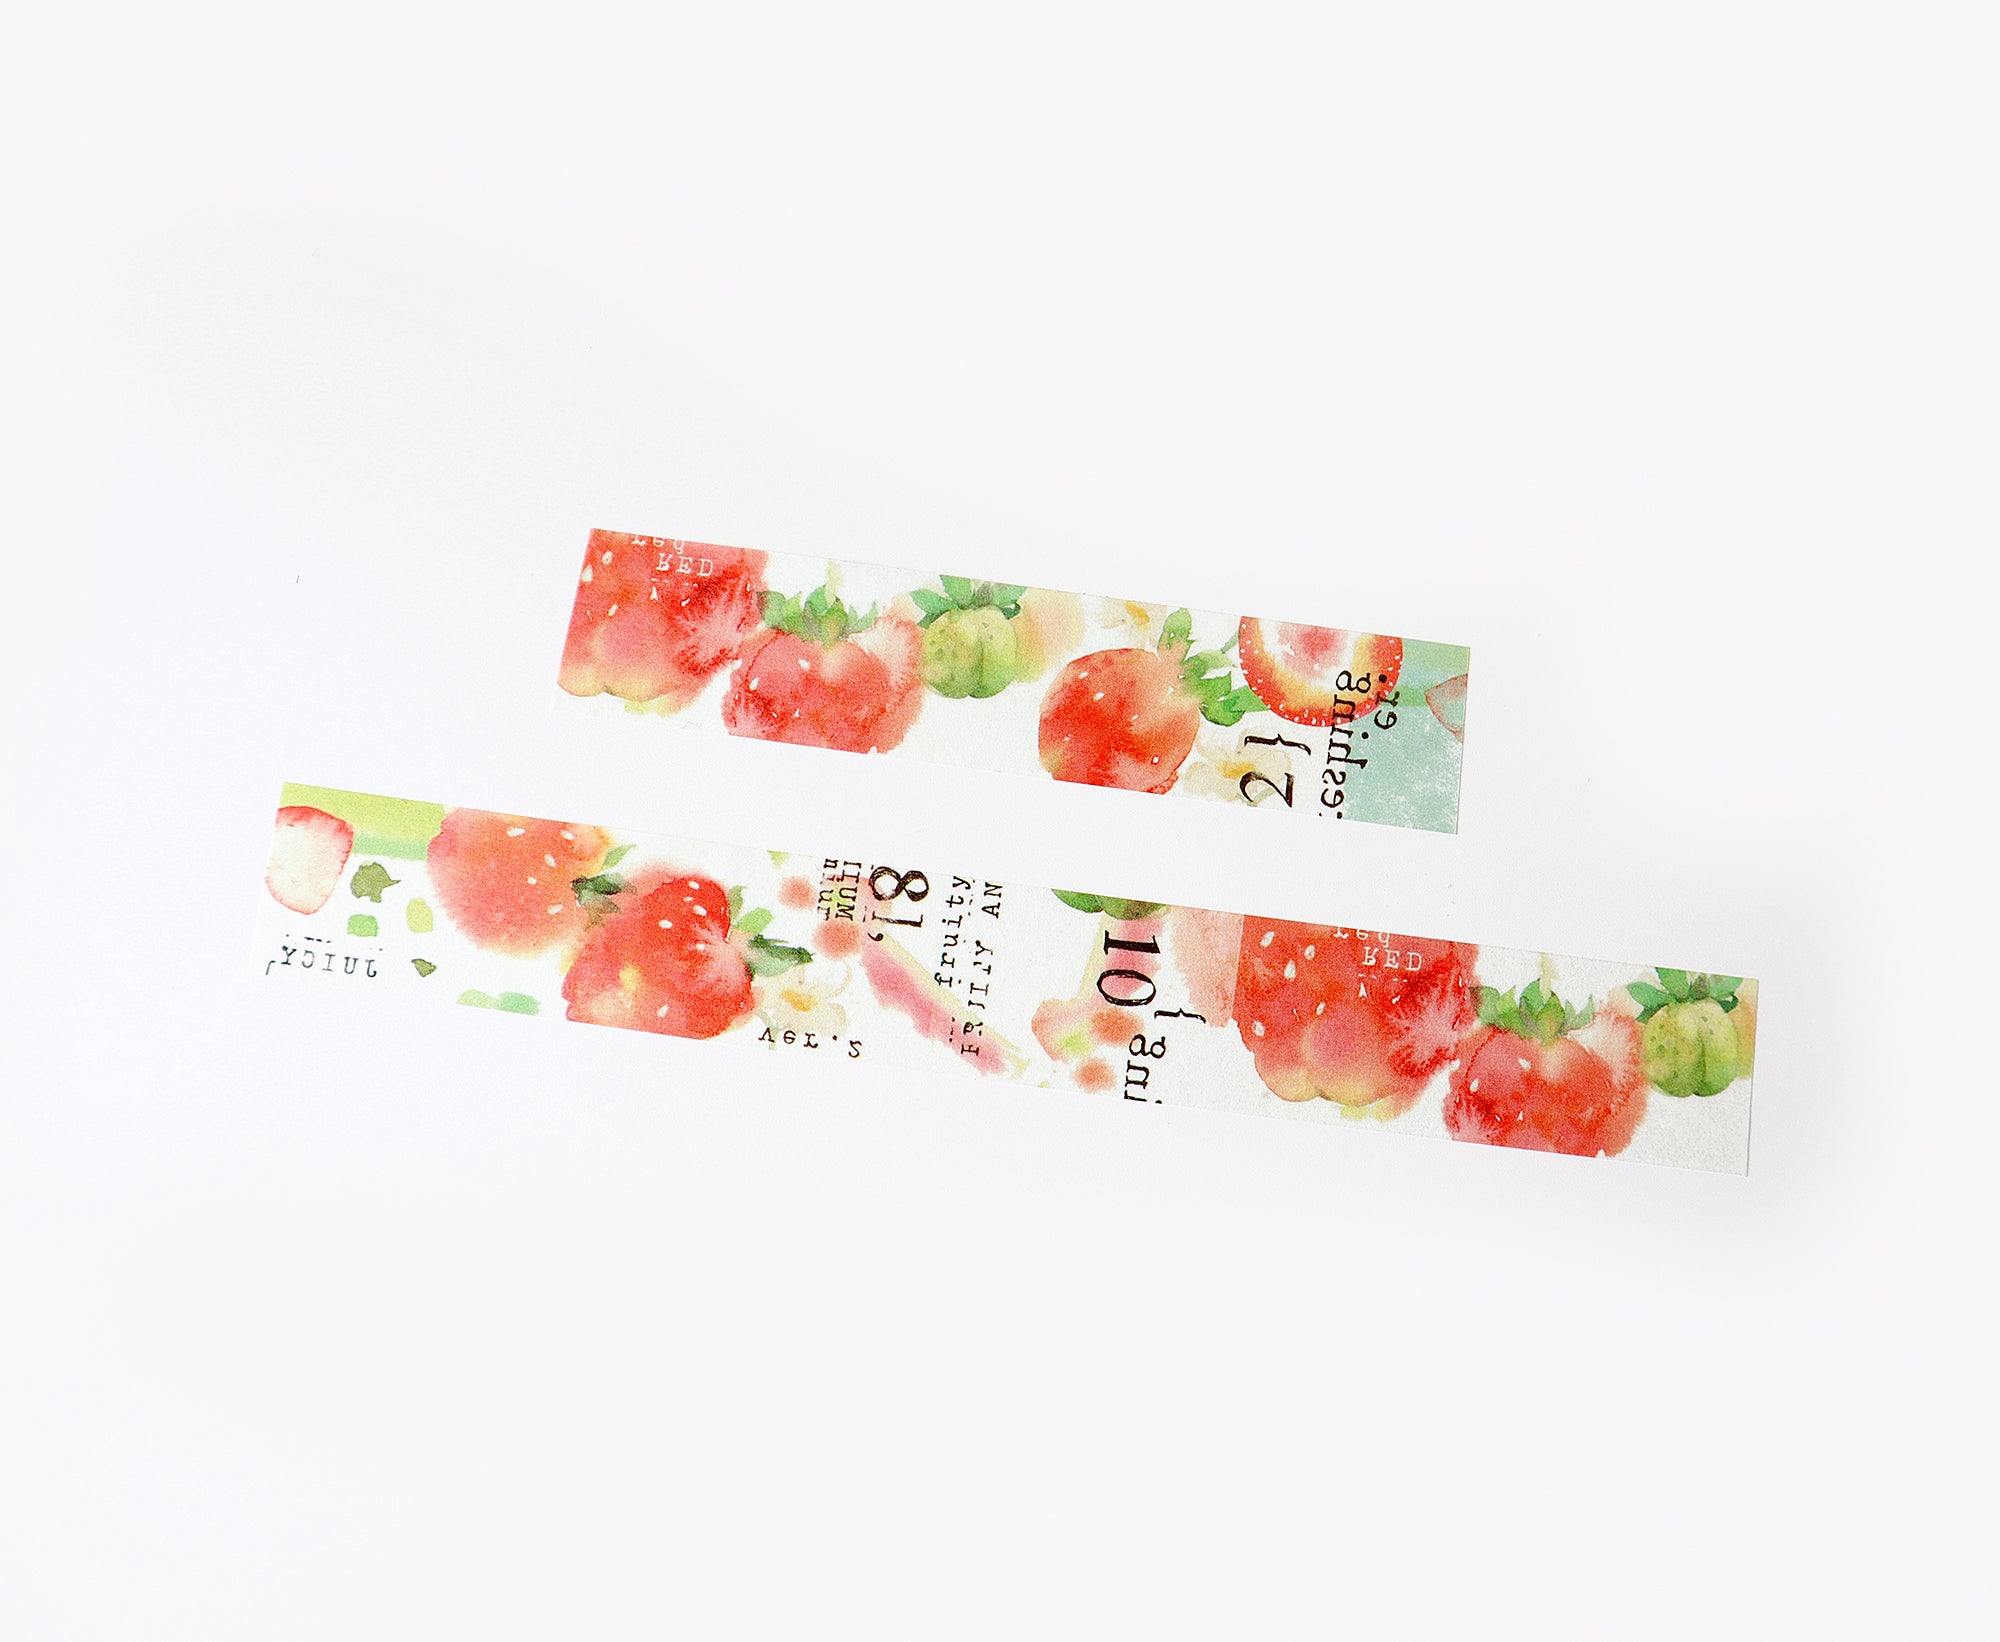 Liang Feng Watercolor Washi Tape: Strawberry Mint (MTW-LF-004)